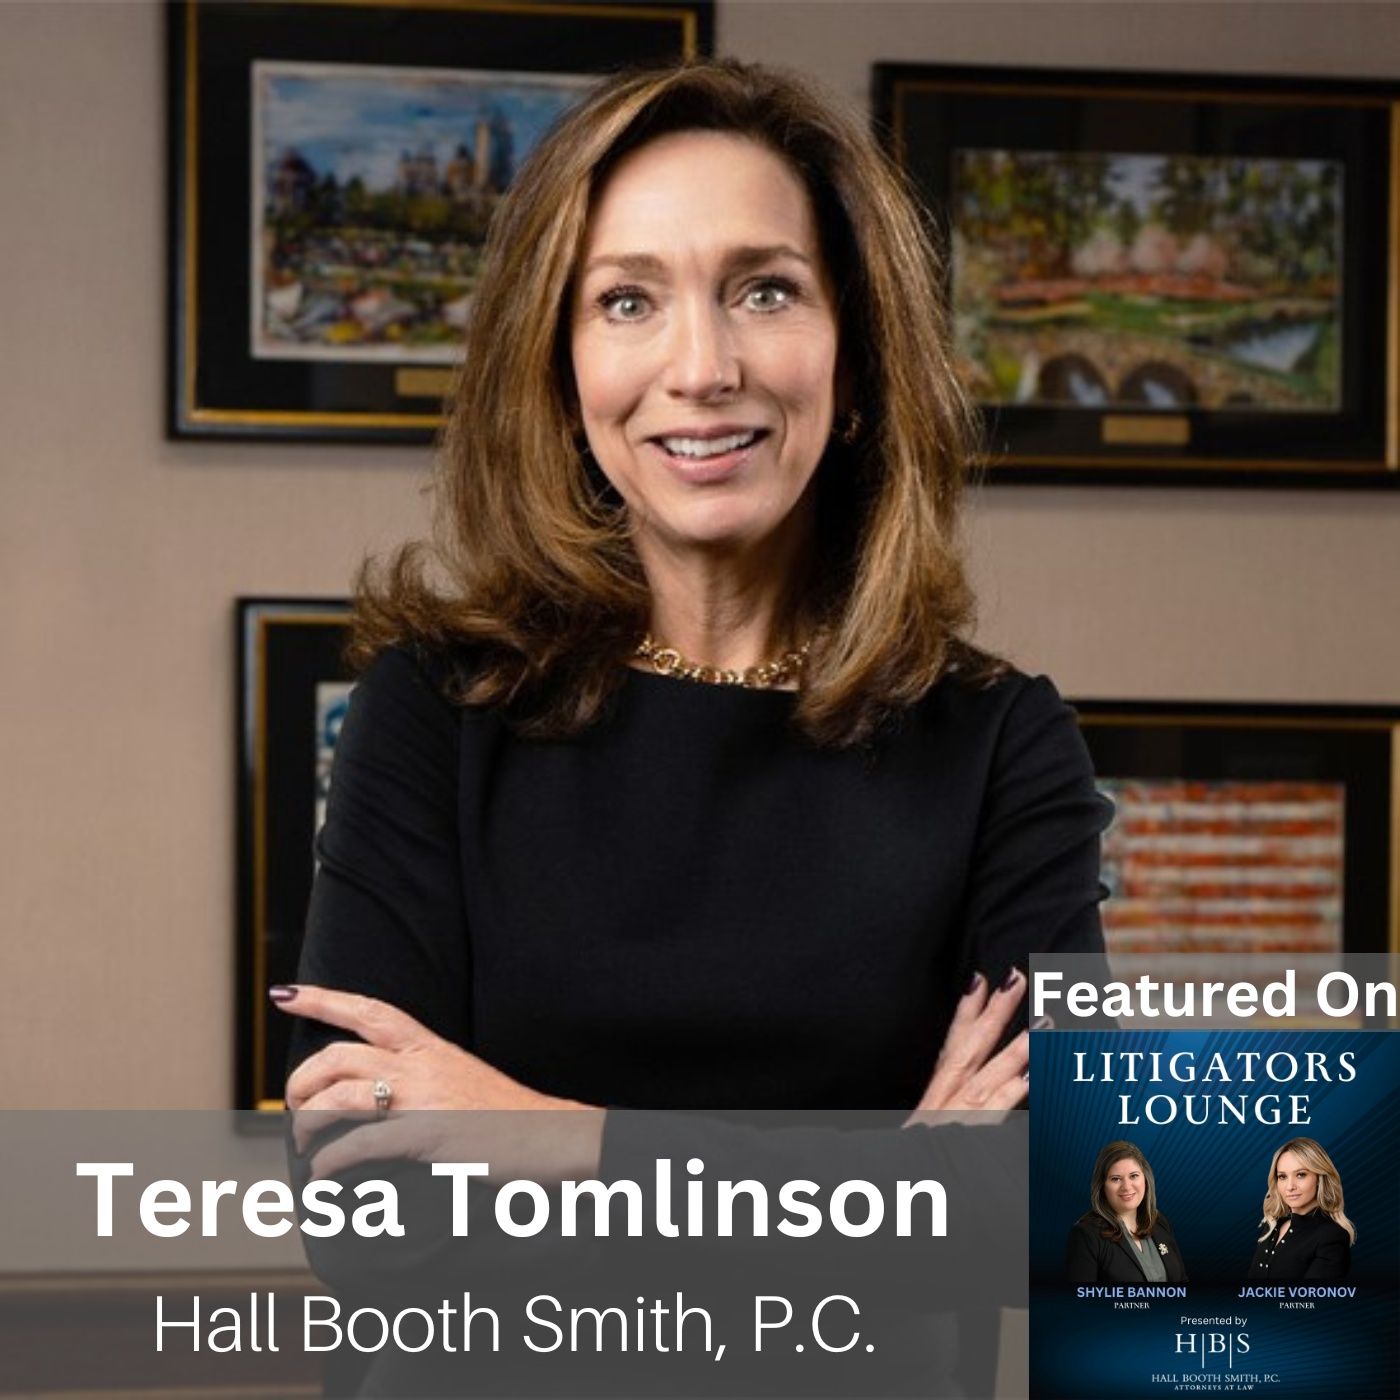 Ending Women's History Month with a Trailblazing Woman: An Interview with Teresa Tomlinson, Hall Booth Smith, P.C.